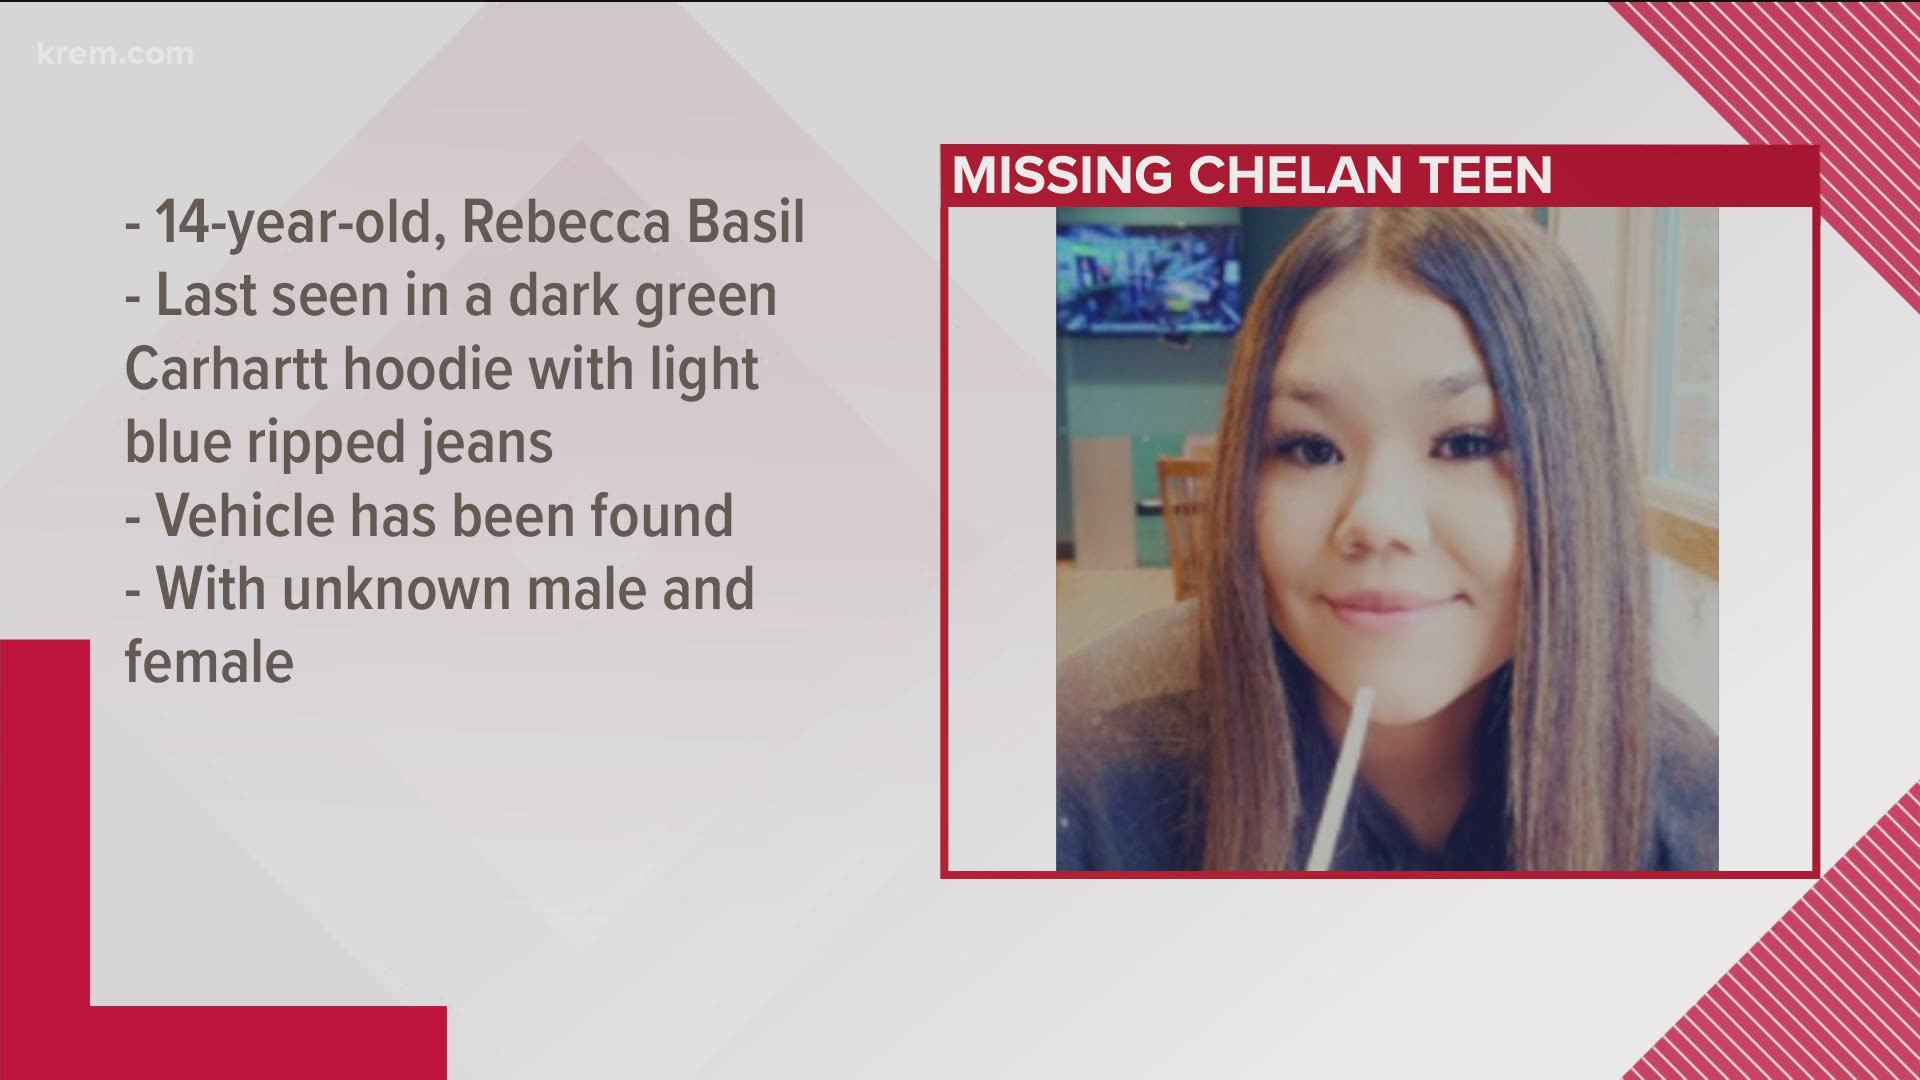 Rebecca Basil is believed to be with a male and female and may be headed to Spokane, authorities said.